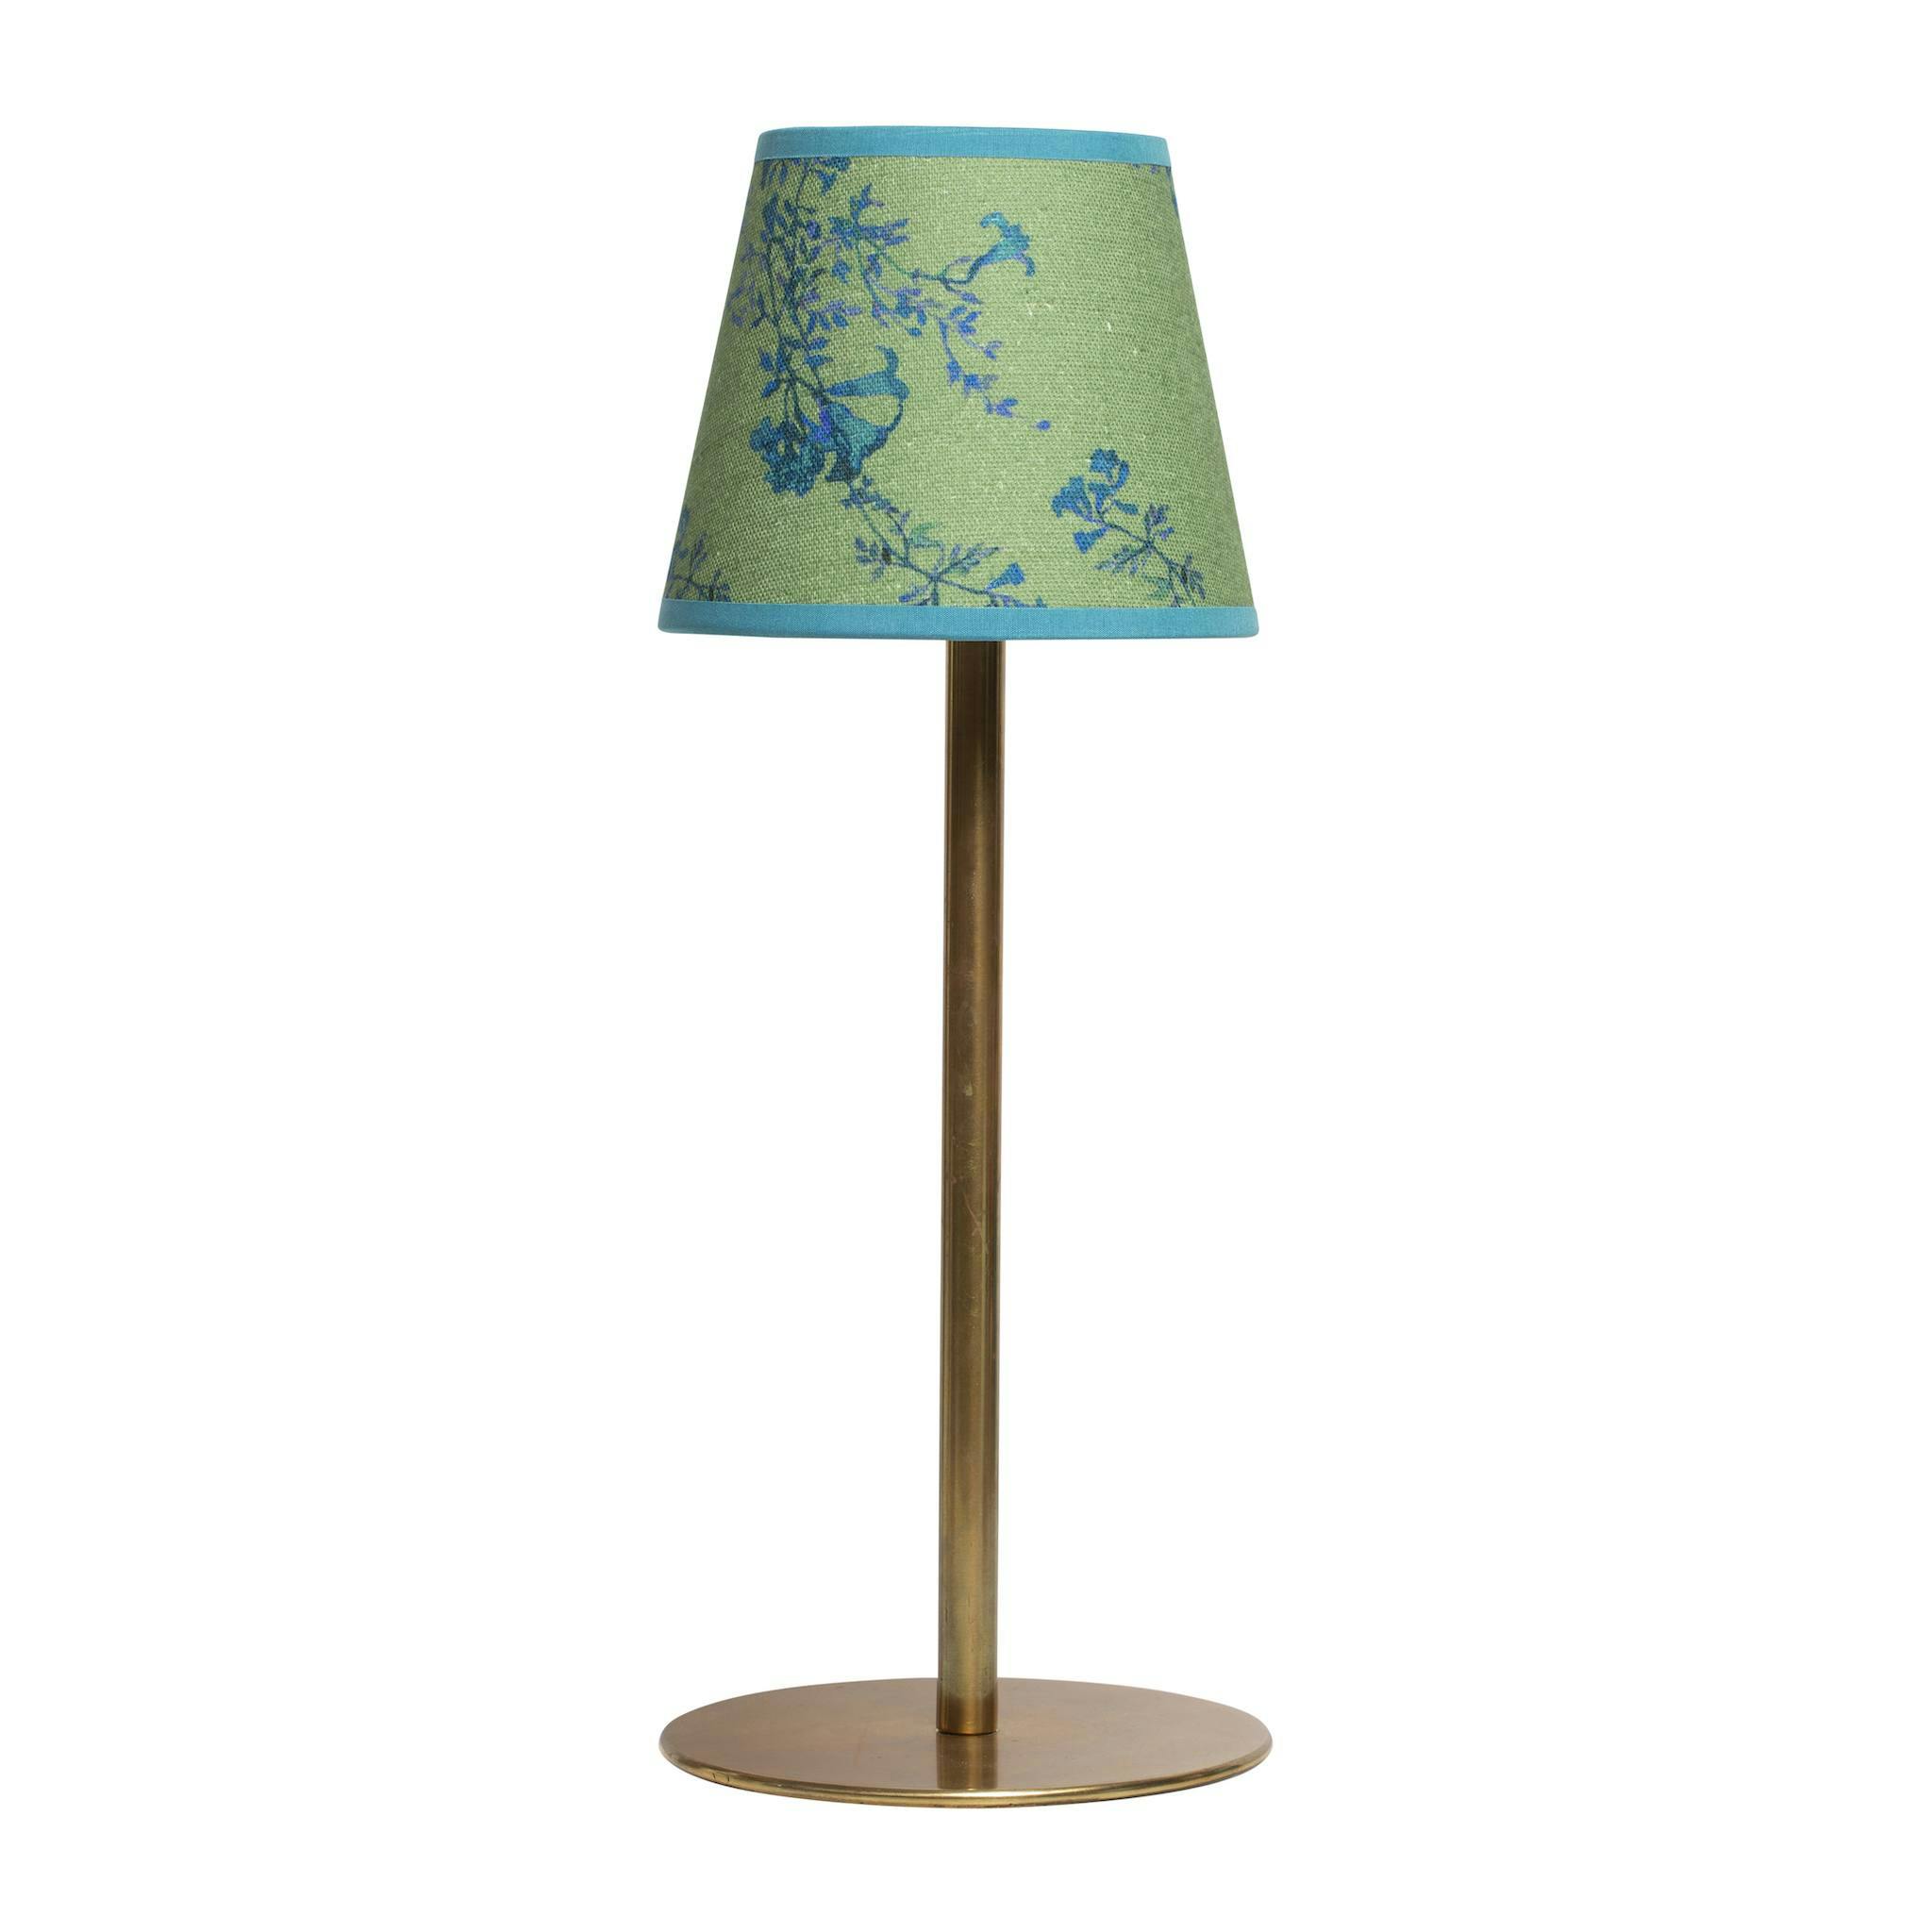 Green floral print candle clip lampshade